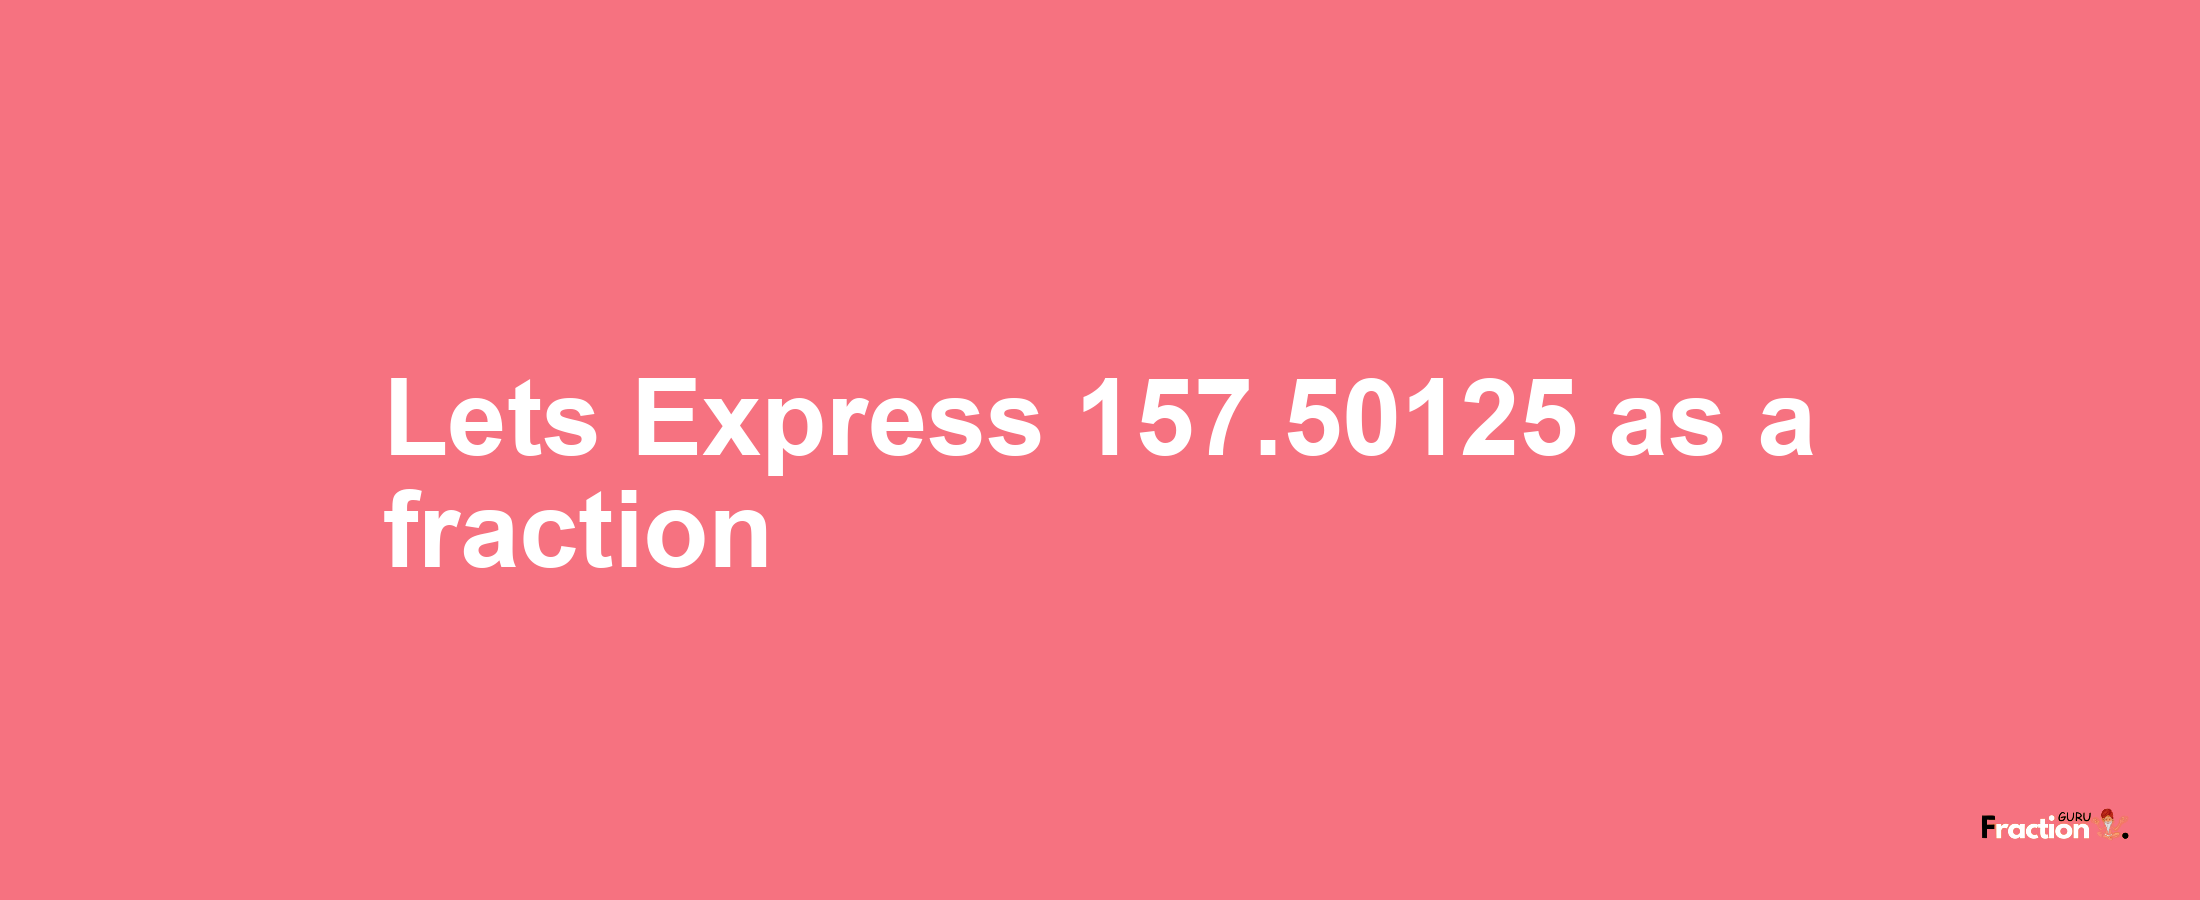 Lets Express 157.50125 as afraction